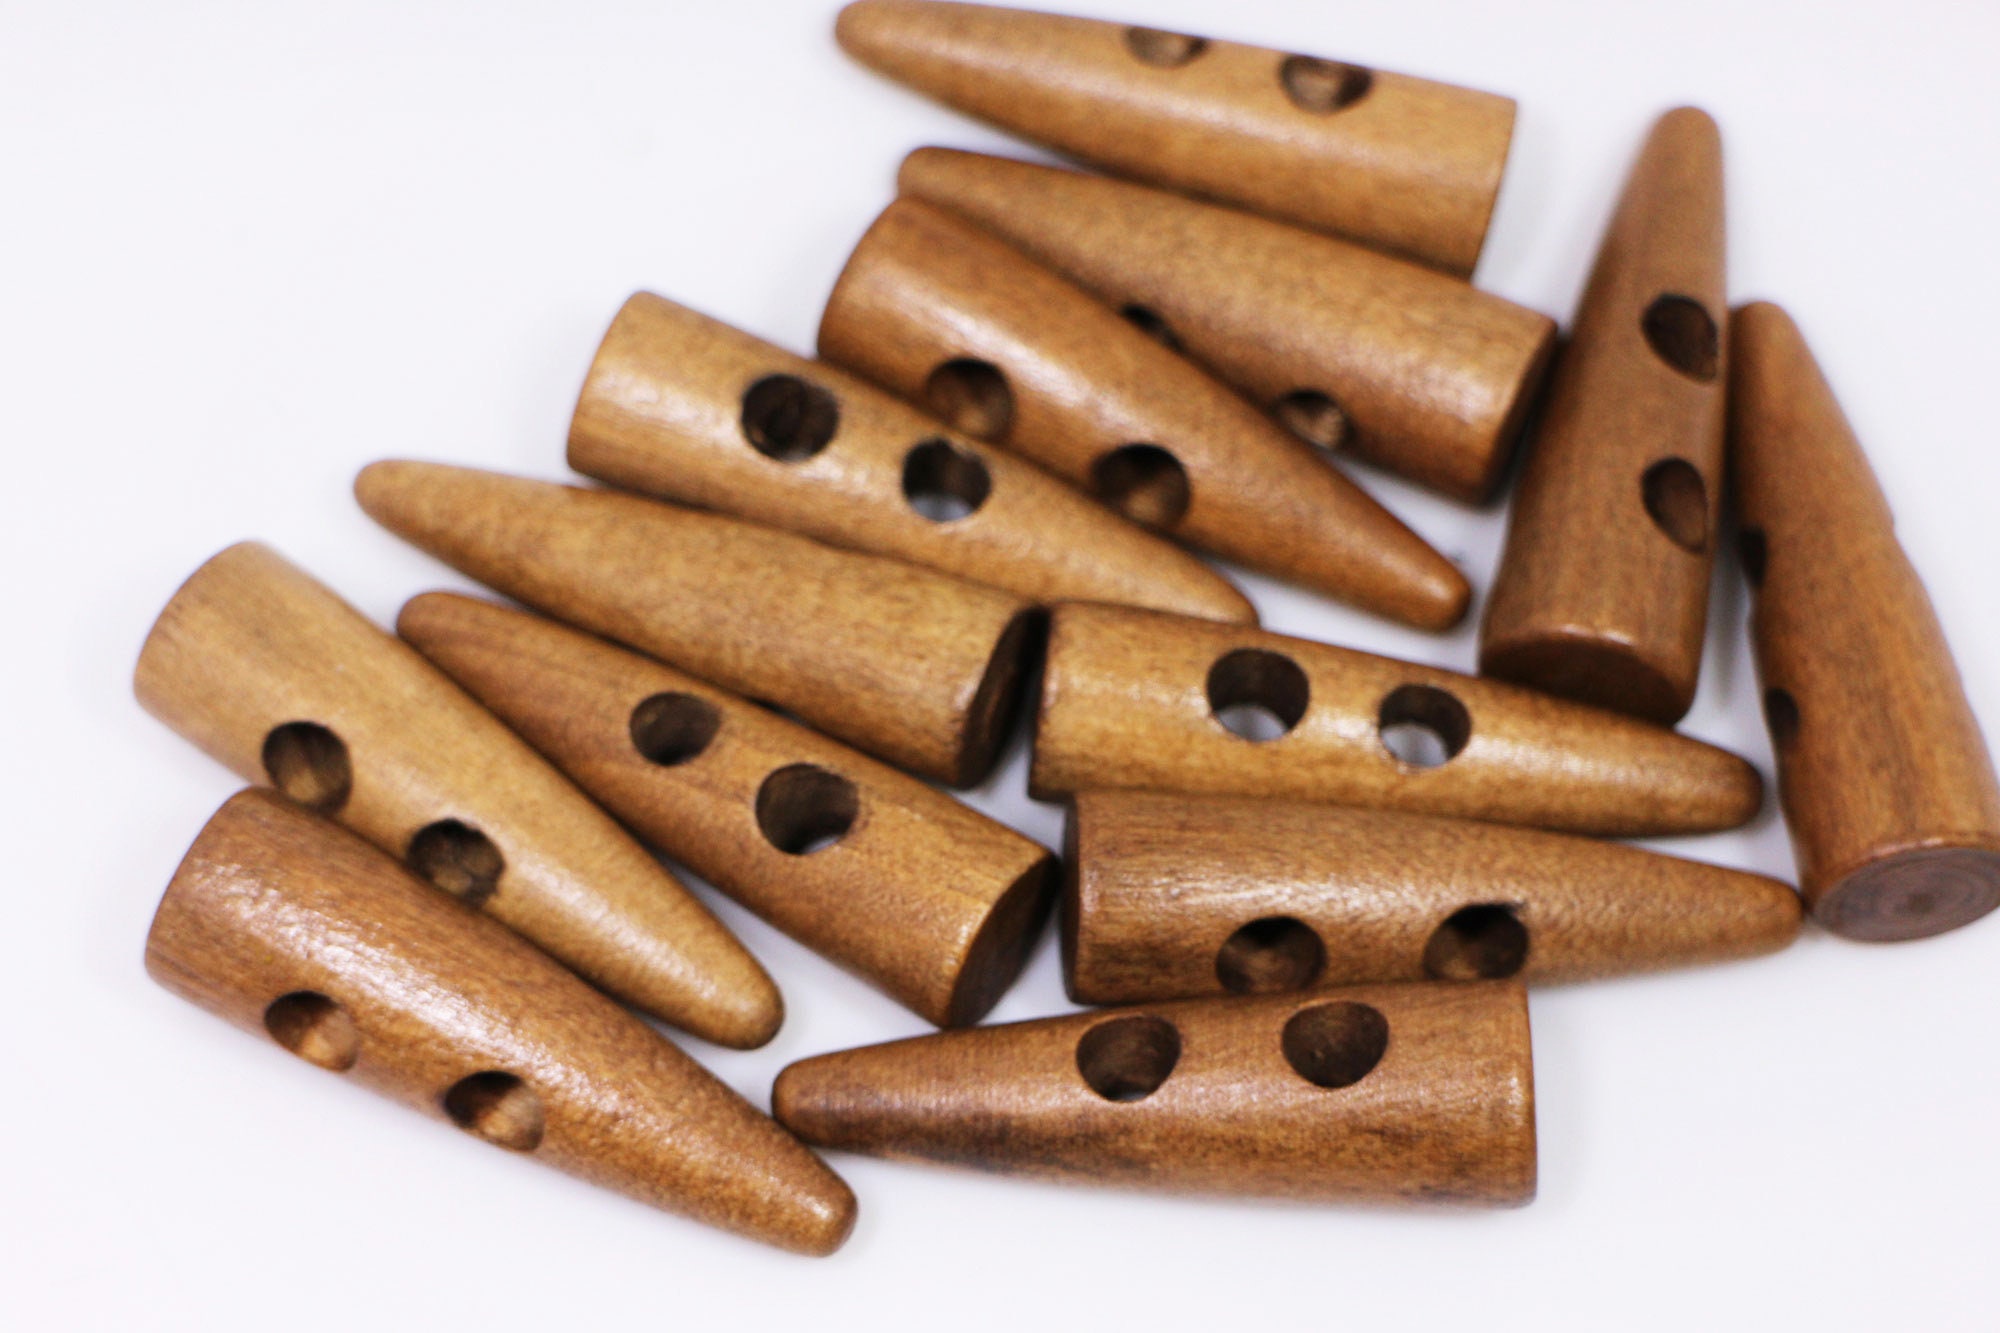 Loops & Threads Brown Wooden Buttons - Each